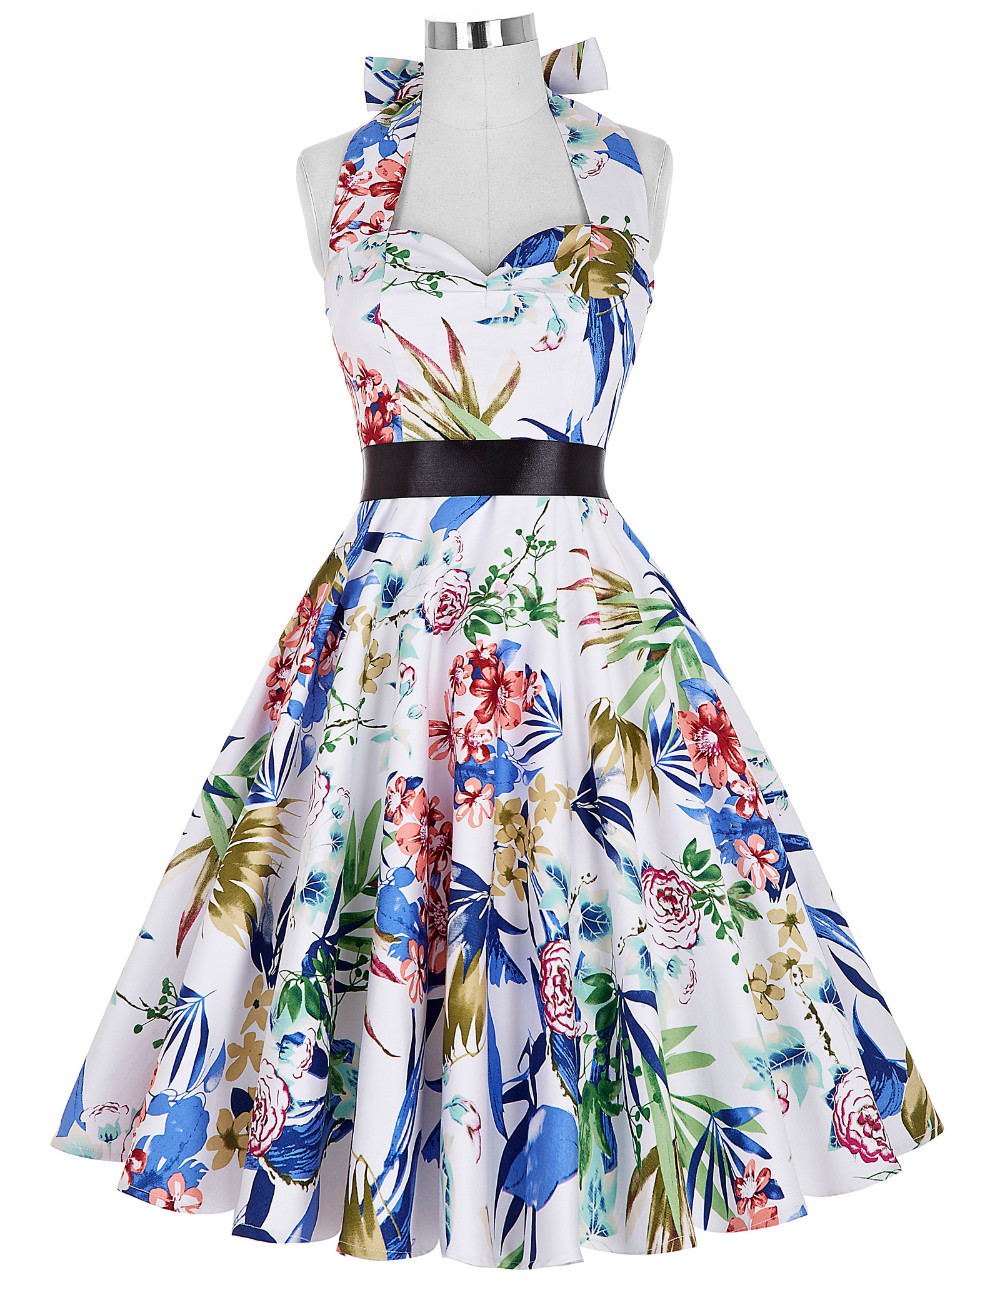 Floral-tea-dresses-summer-style-women-Vintage-rocabilly-party-sleeveless-cotton-prin-casual-pin-up-s-32657455775